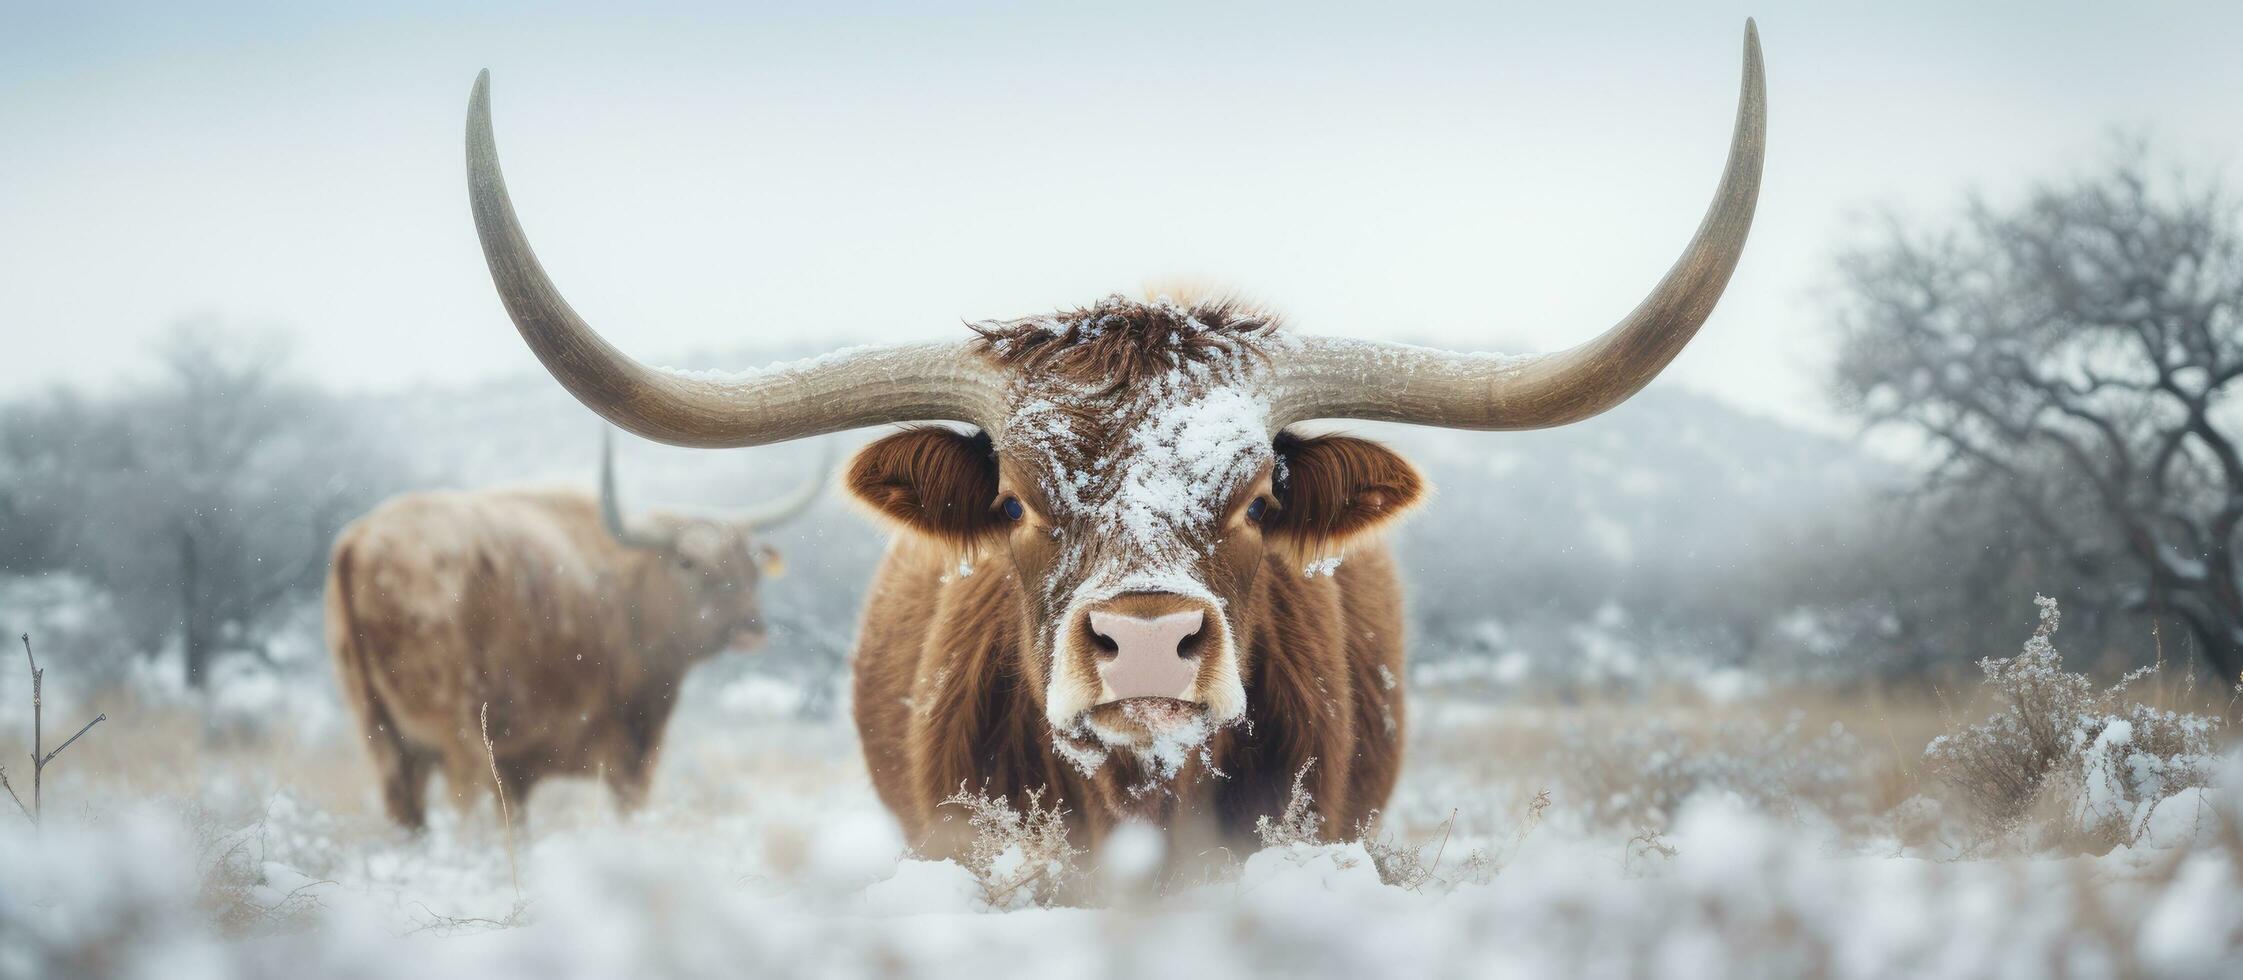 A Texas Longhorn cow with big horns is seen in the winter with blurred snow in the foreground and photo